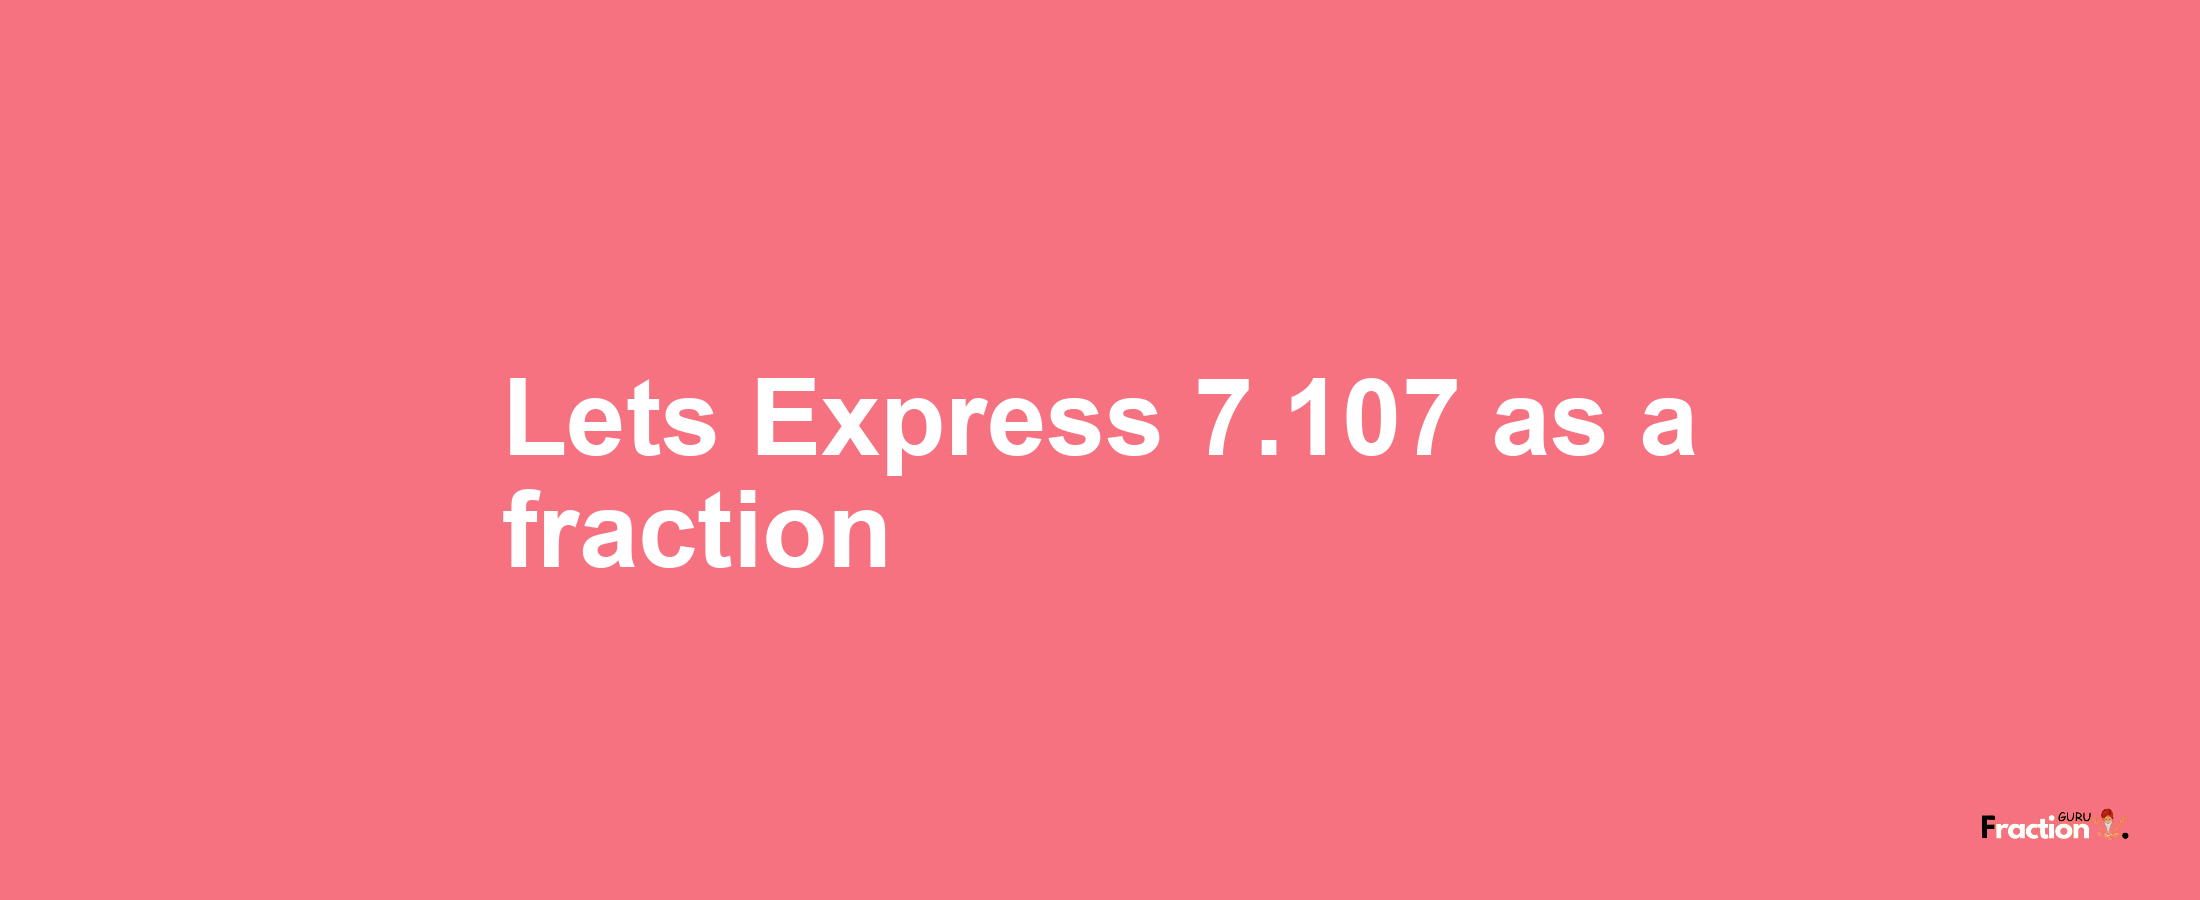 Lets Express 7.107 as afraction